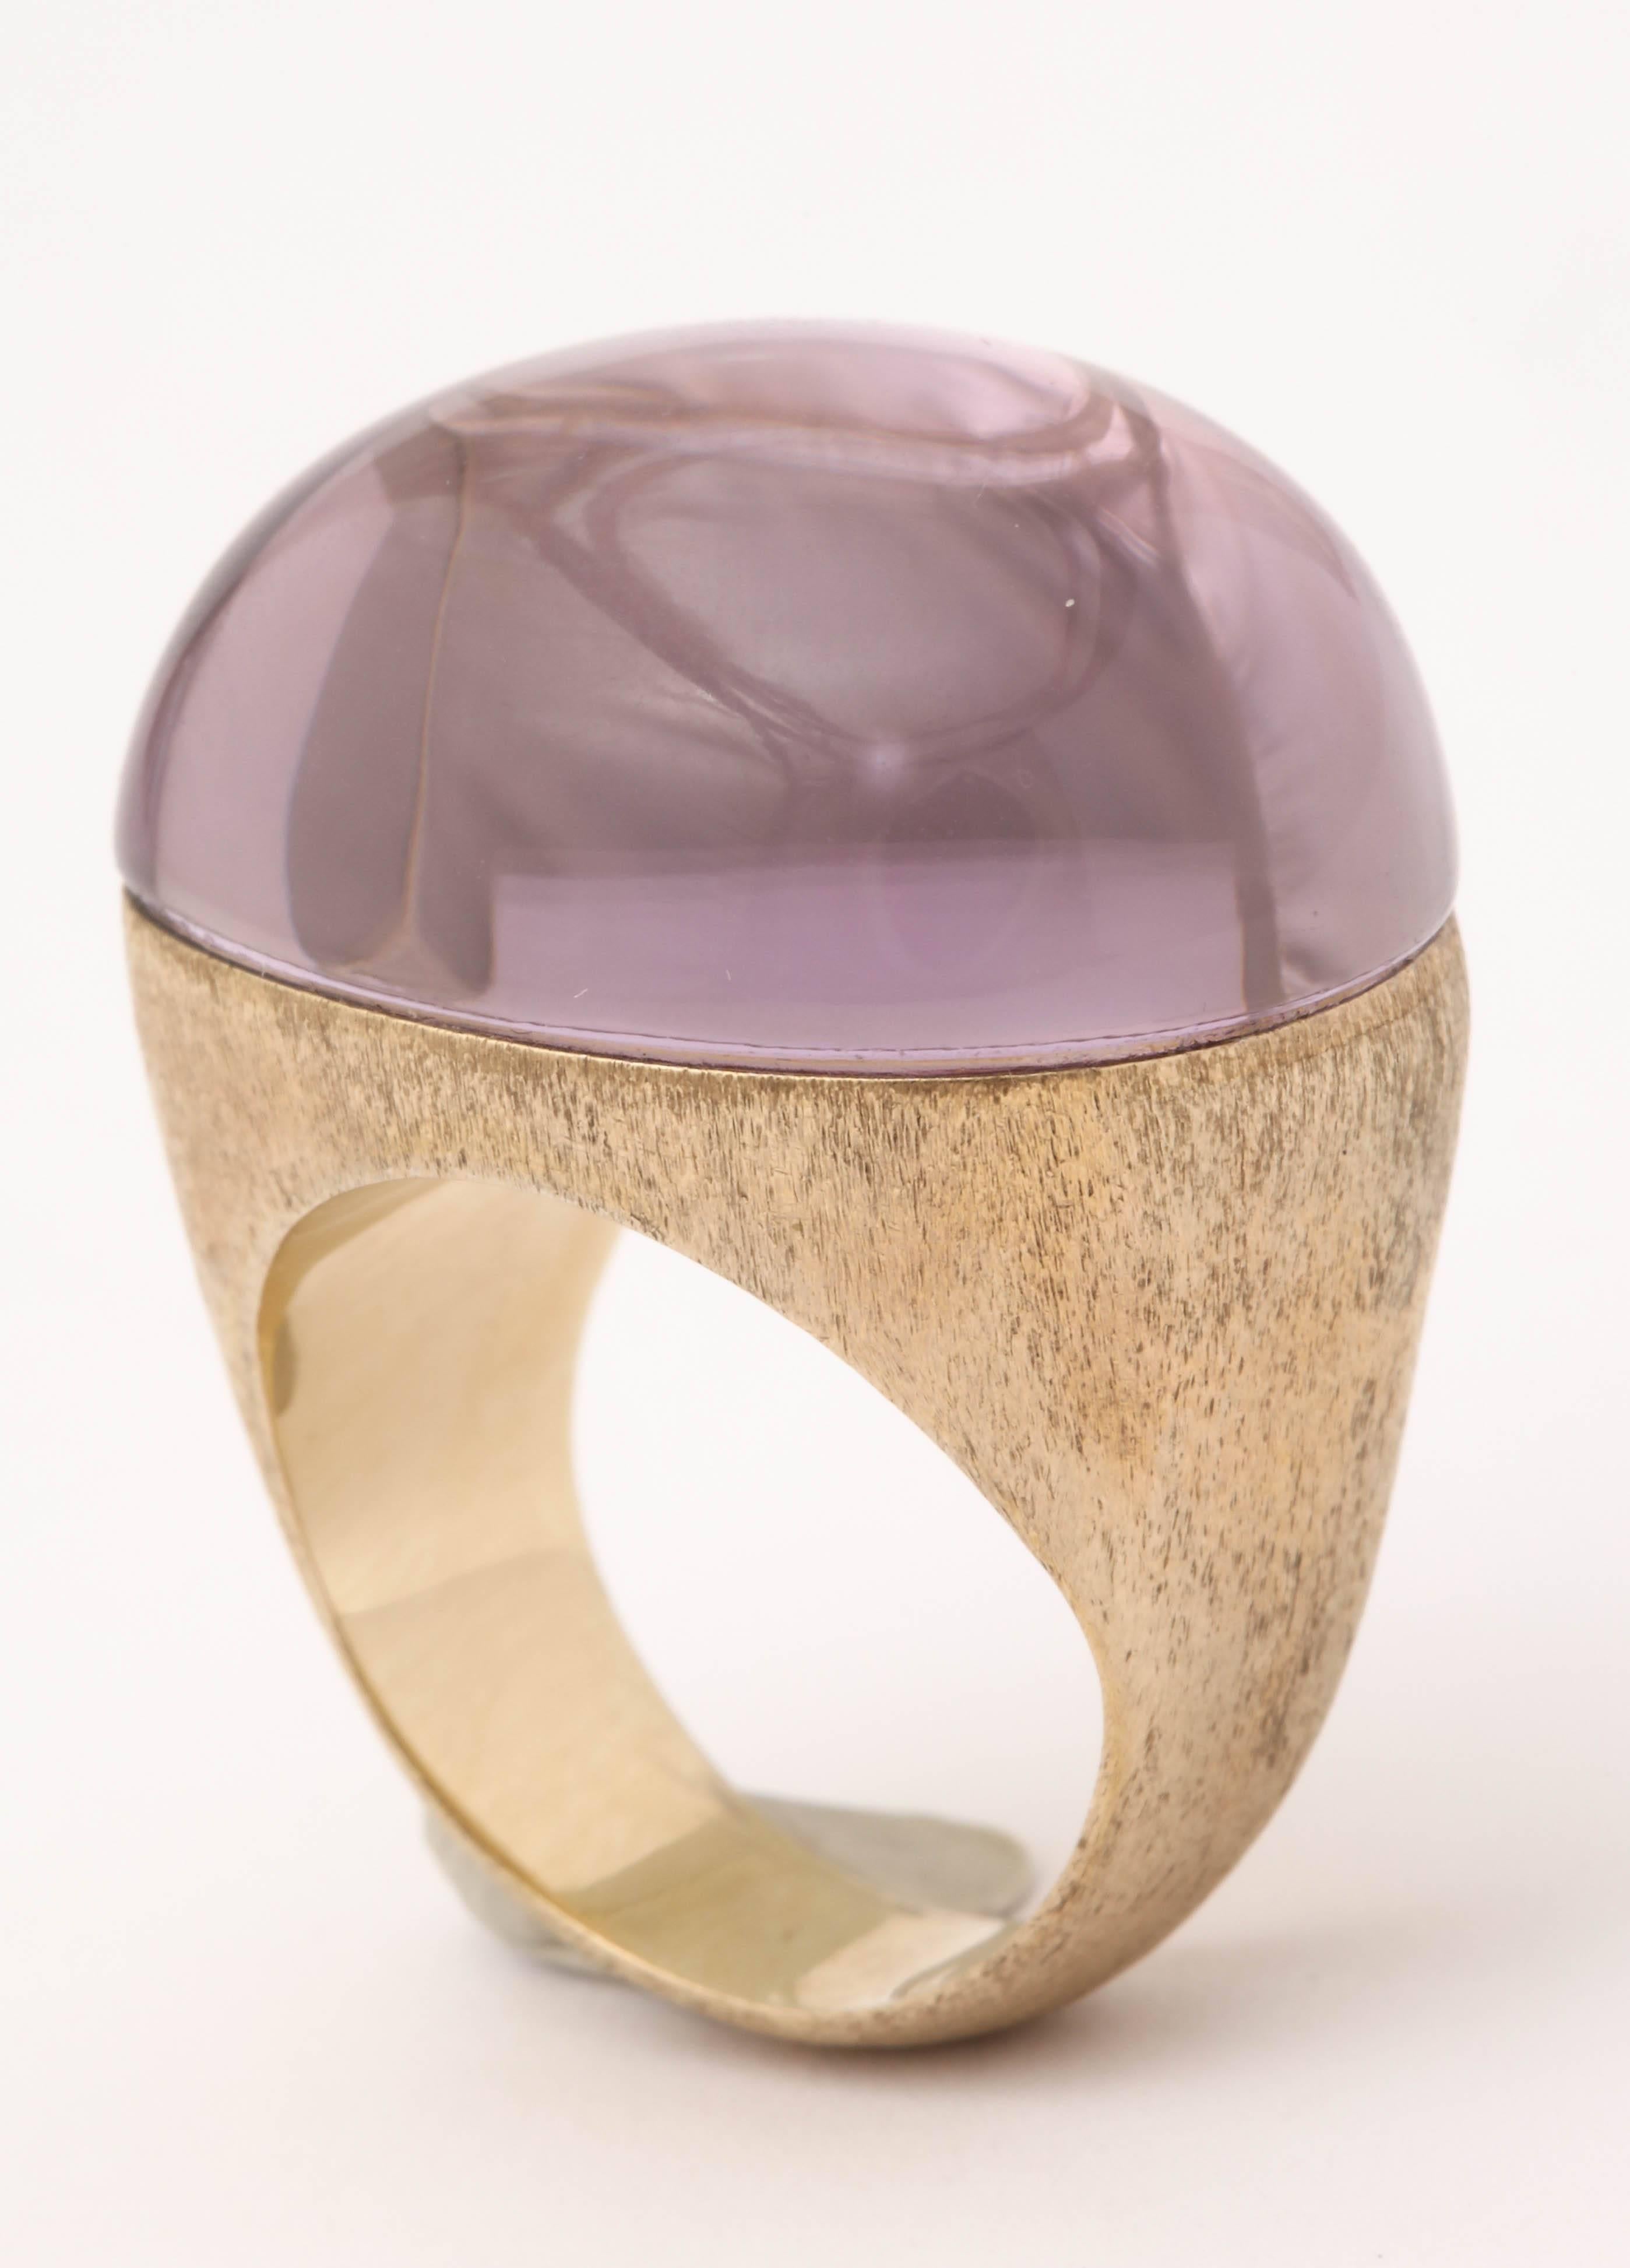 One Ladies H.Stern 18kt Gold Large Cocktail Ring Composed With One 32 Mm Large Cabochon Stone In The Center. Beautiful Florentine Brushed Gold Finish For Its Mounting. Ring Currently Size 6 And 1/2, And May Easily Be Resized To Any Size Necessary.